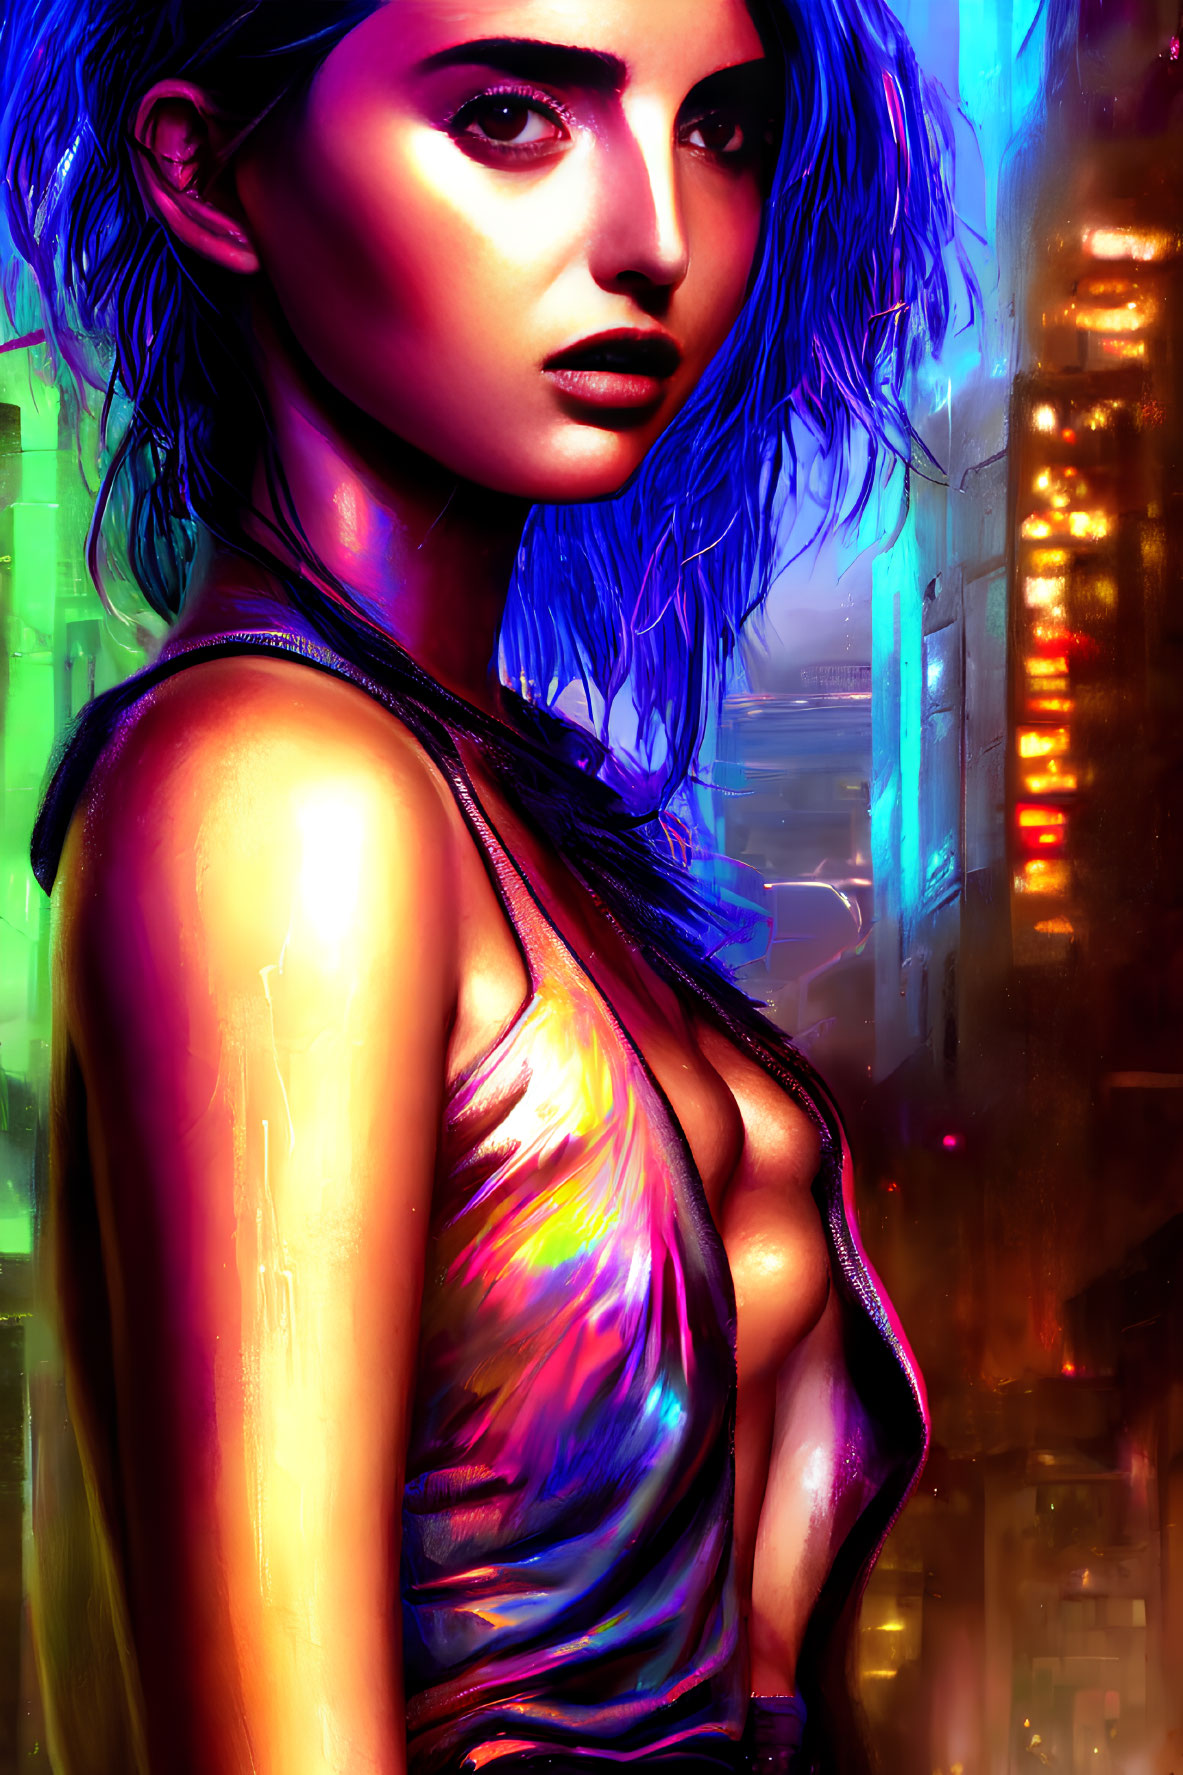 Blue-haired woman in metallic dress against neon cityscape.